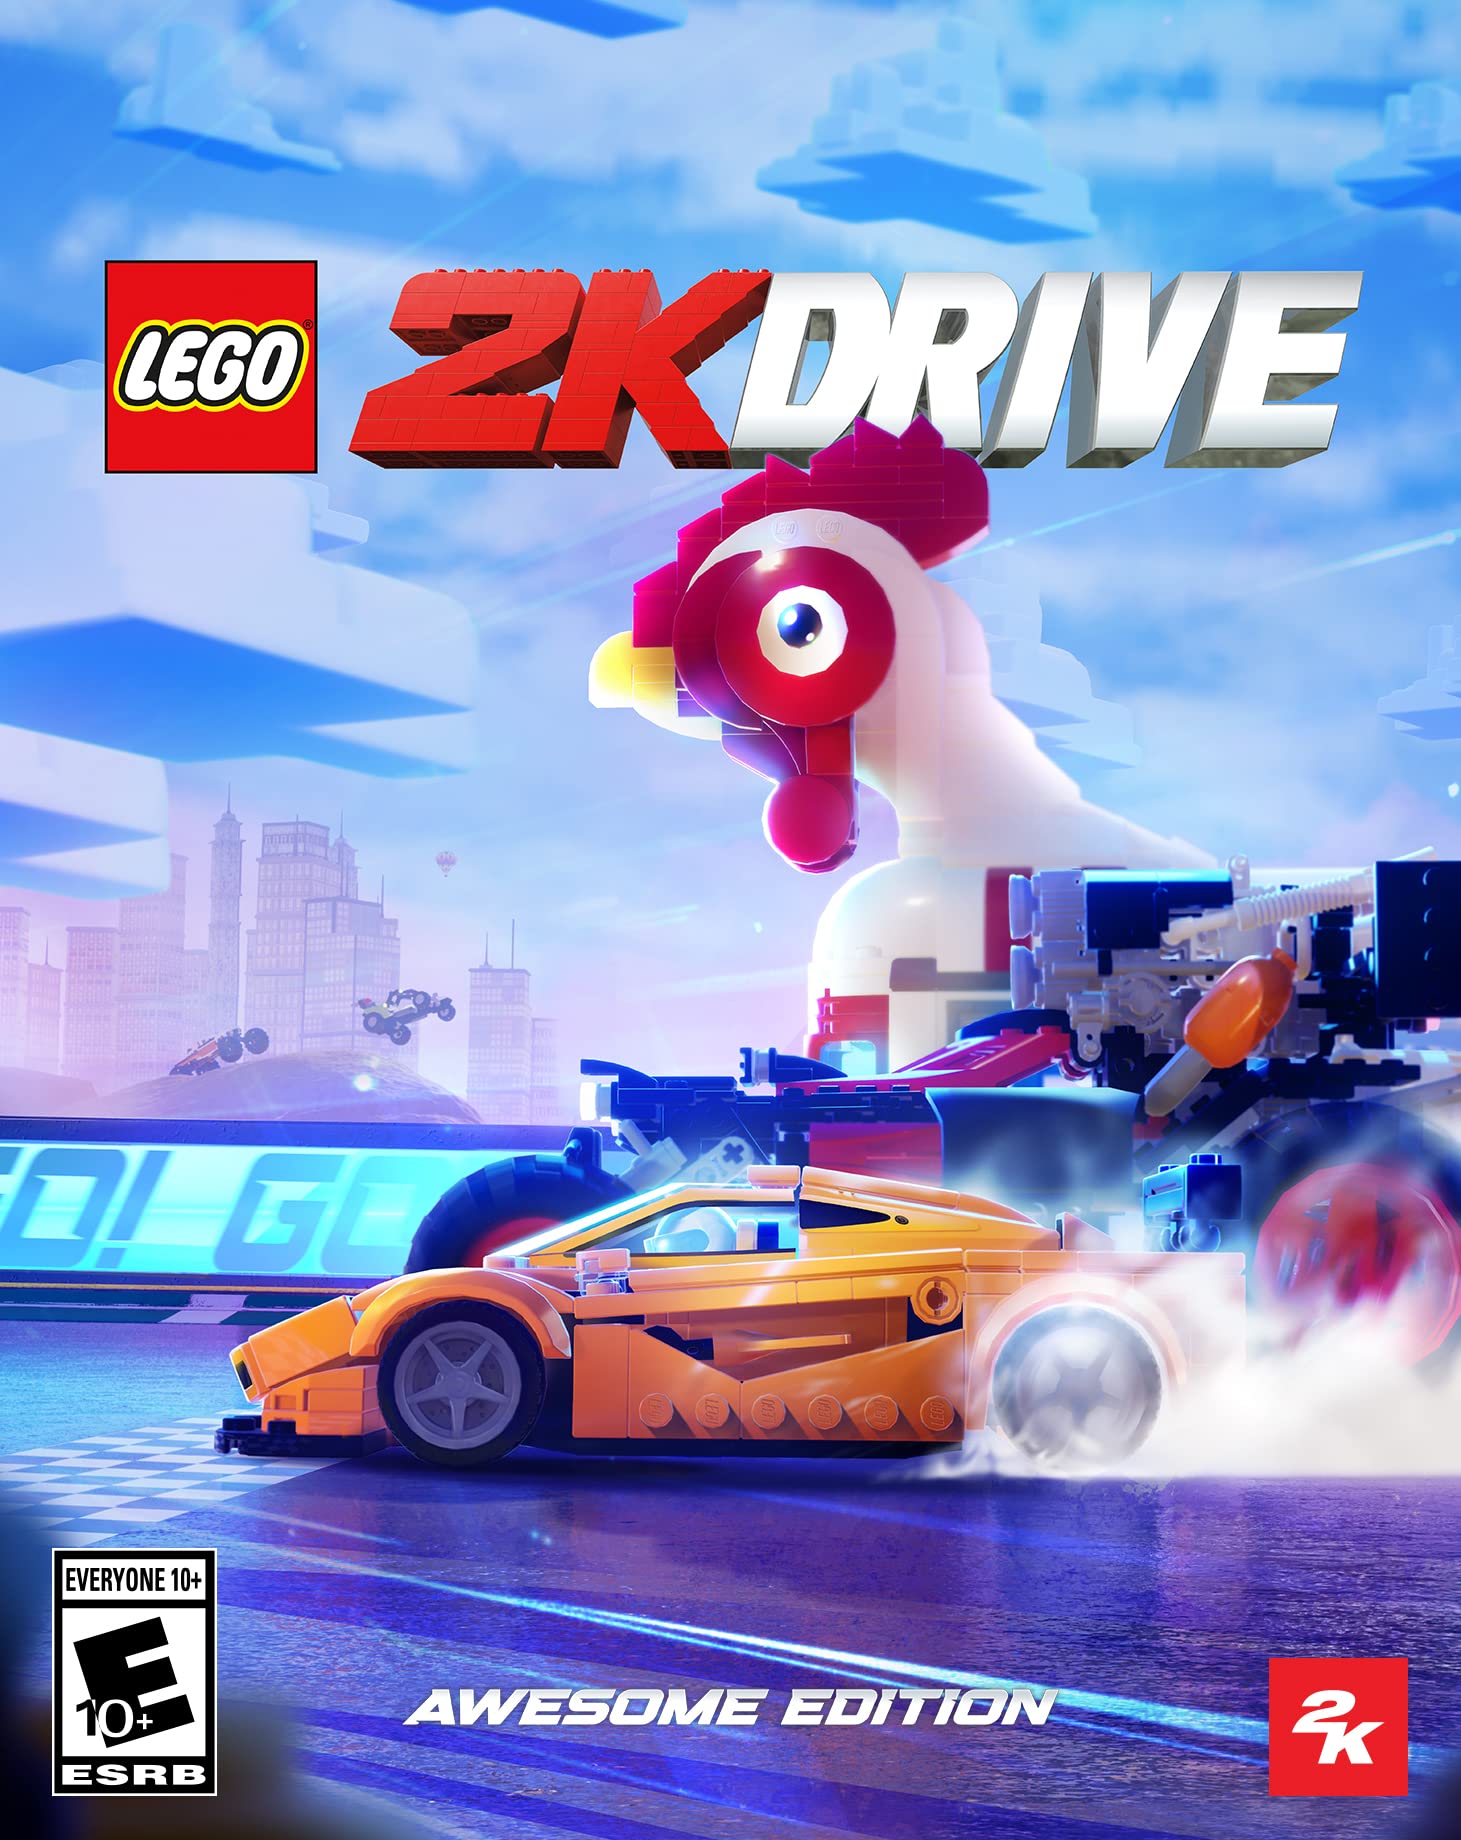 LEGO 2K Drive Awesome - PC [Online Game Code]